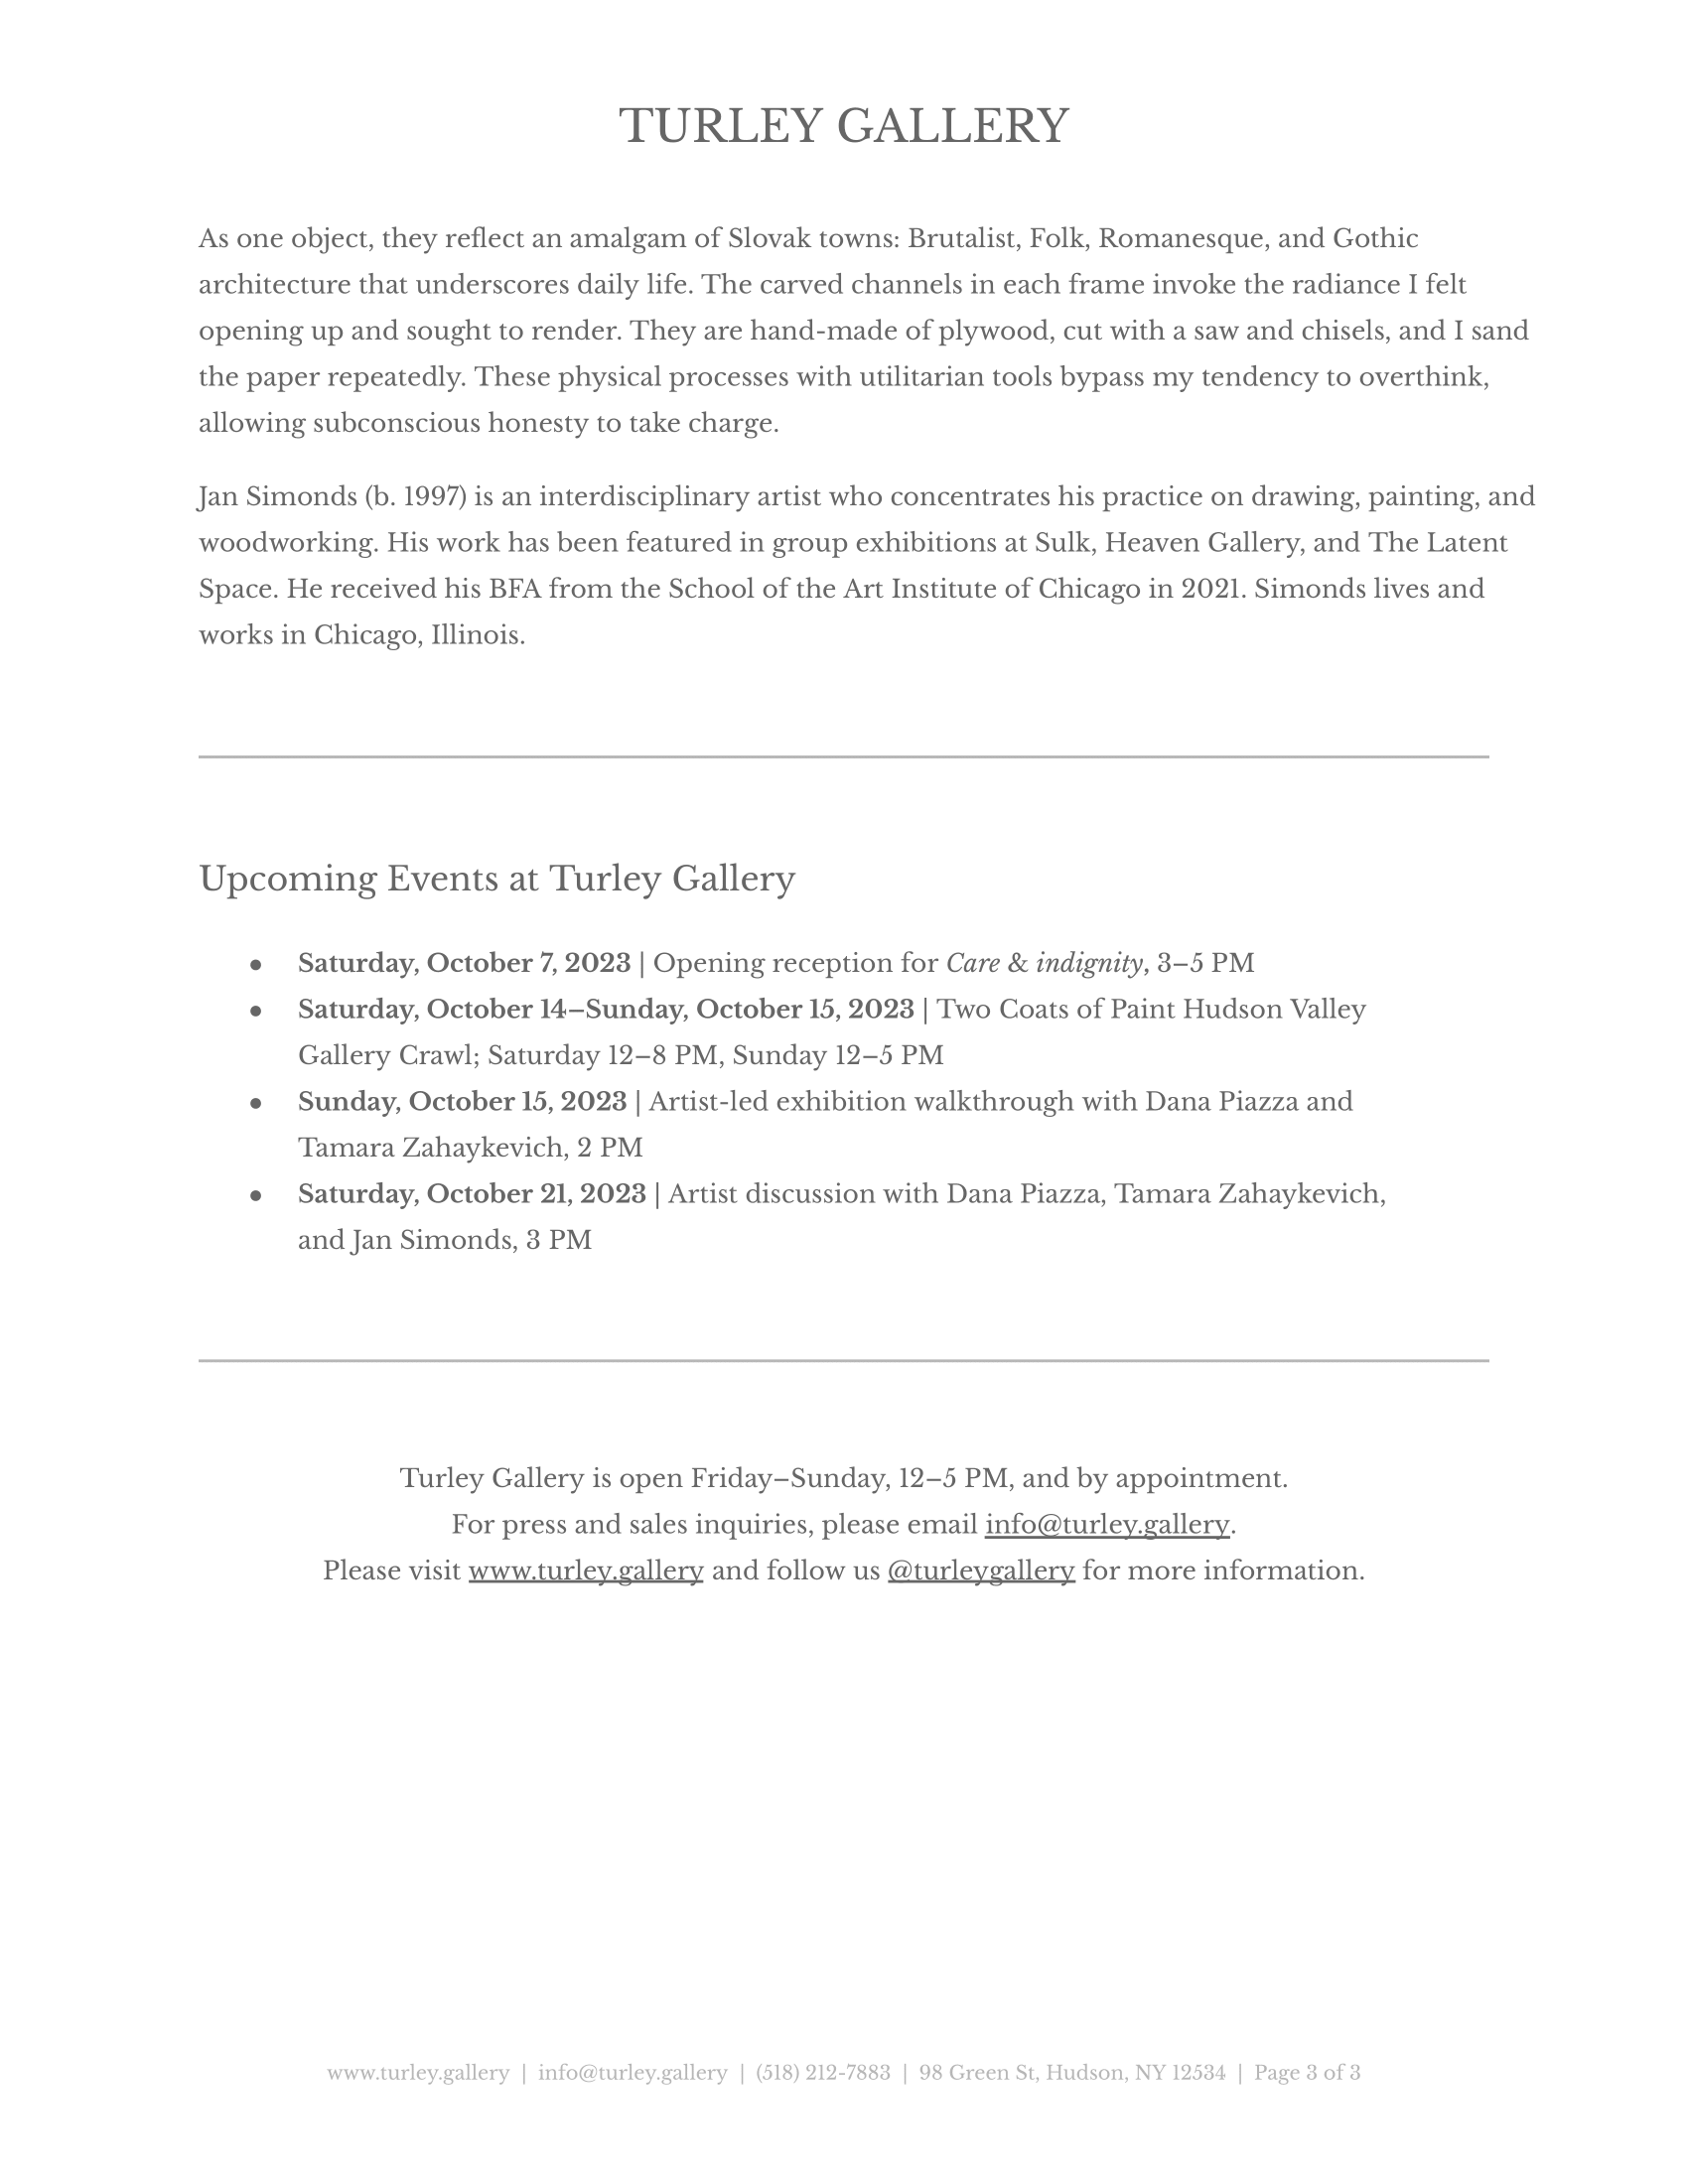 100723-turley-gallery-jan-simonds-indignity-press-release (1)-3.png